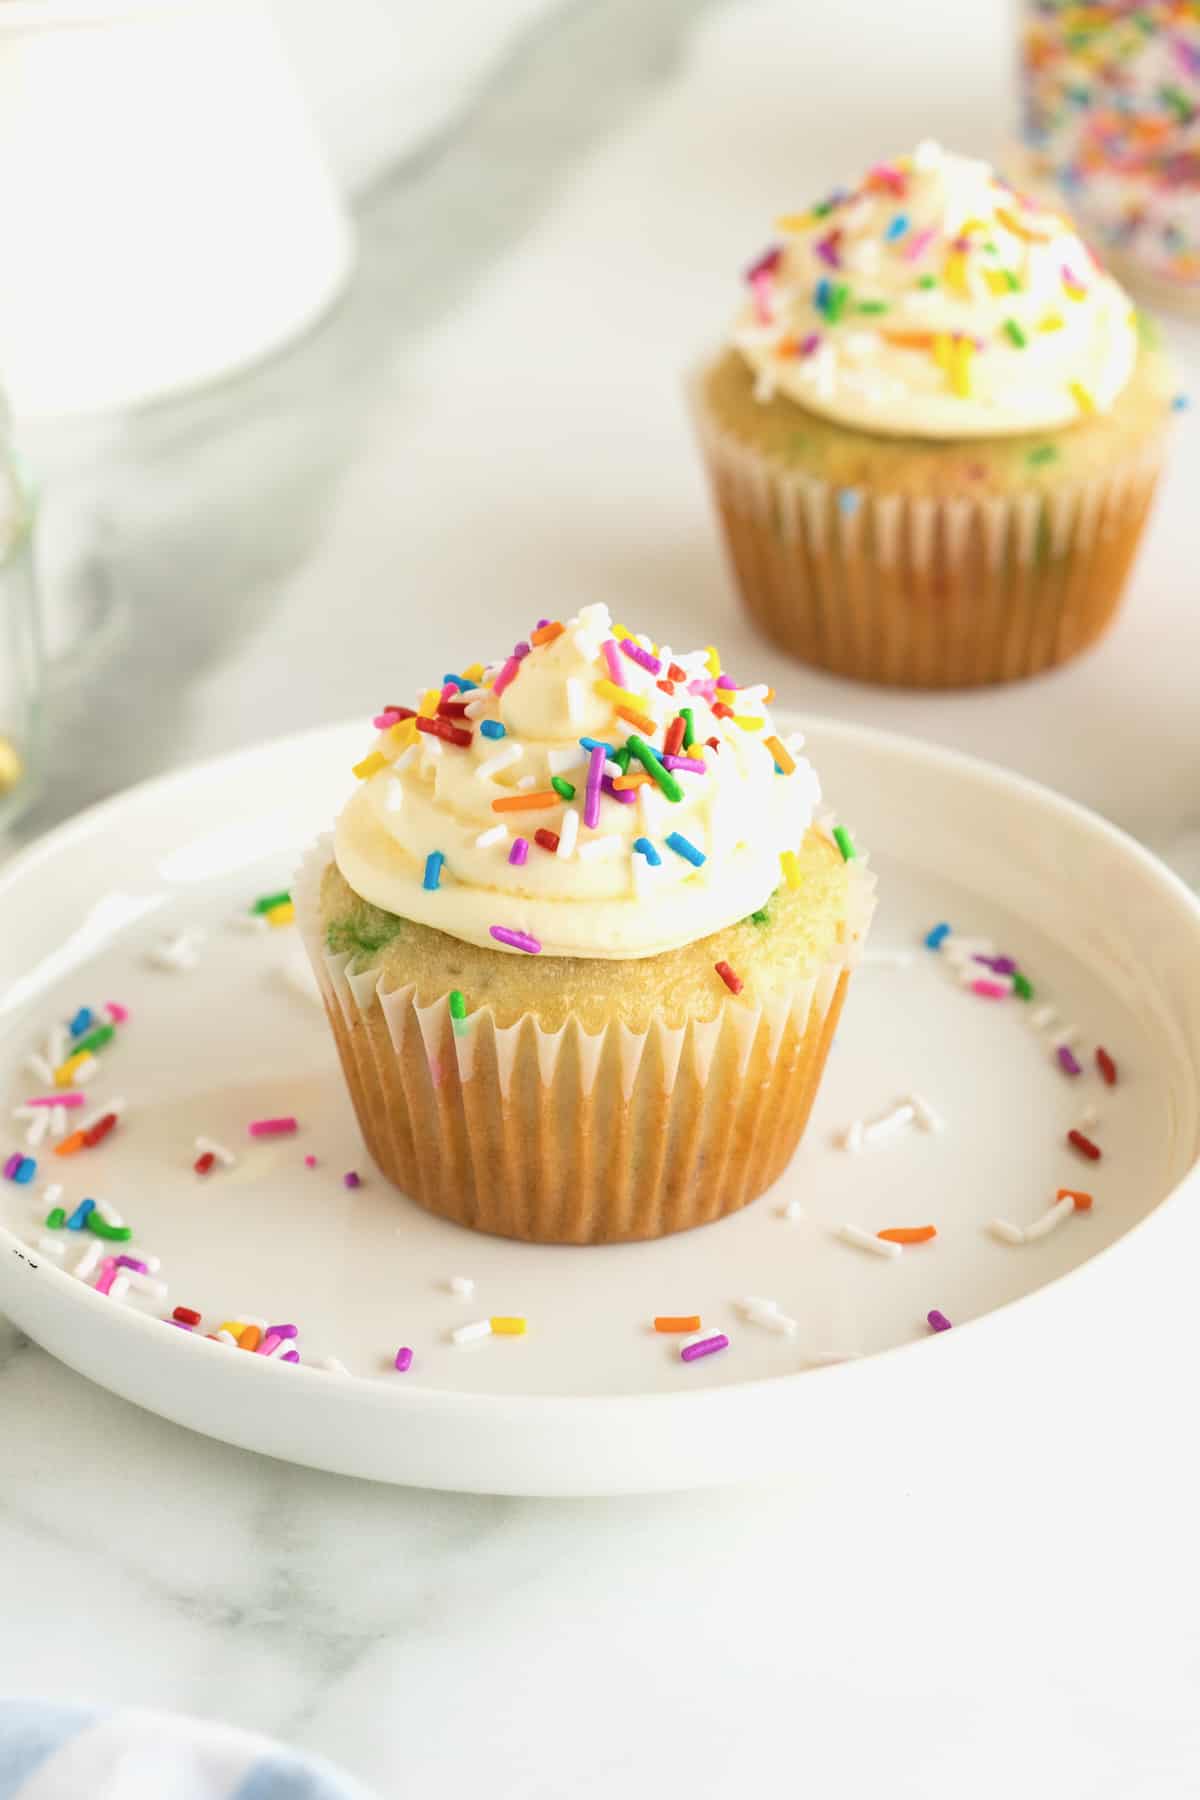 A vanilla cupcake with vanilla frosting and  colorful sprinkles on a white plate. Colorful sprinkles are scattered on a the plate. A second cupcake sits in the background on the white marble counter.